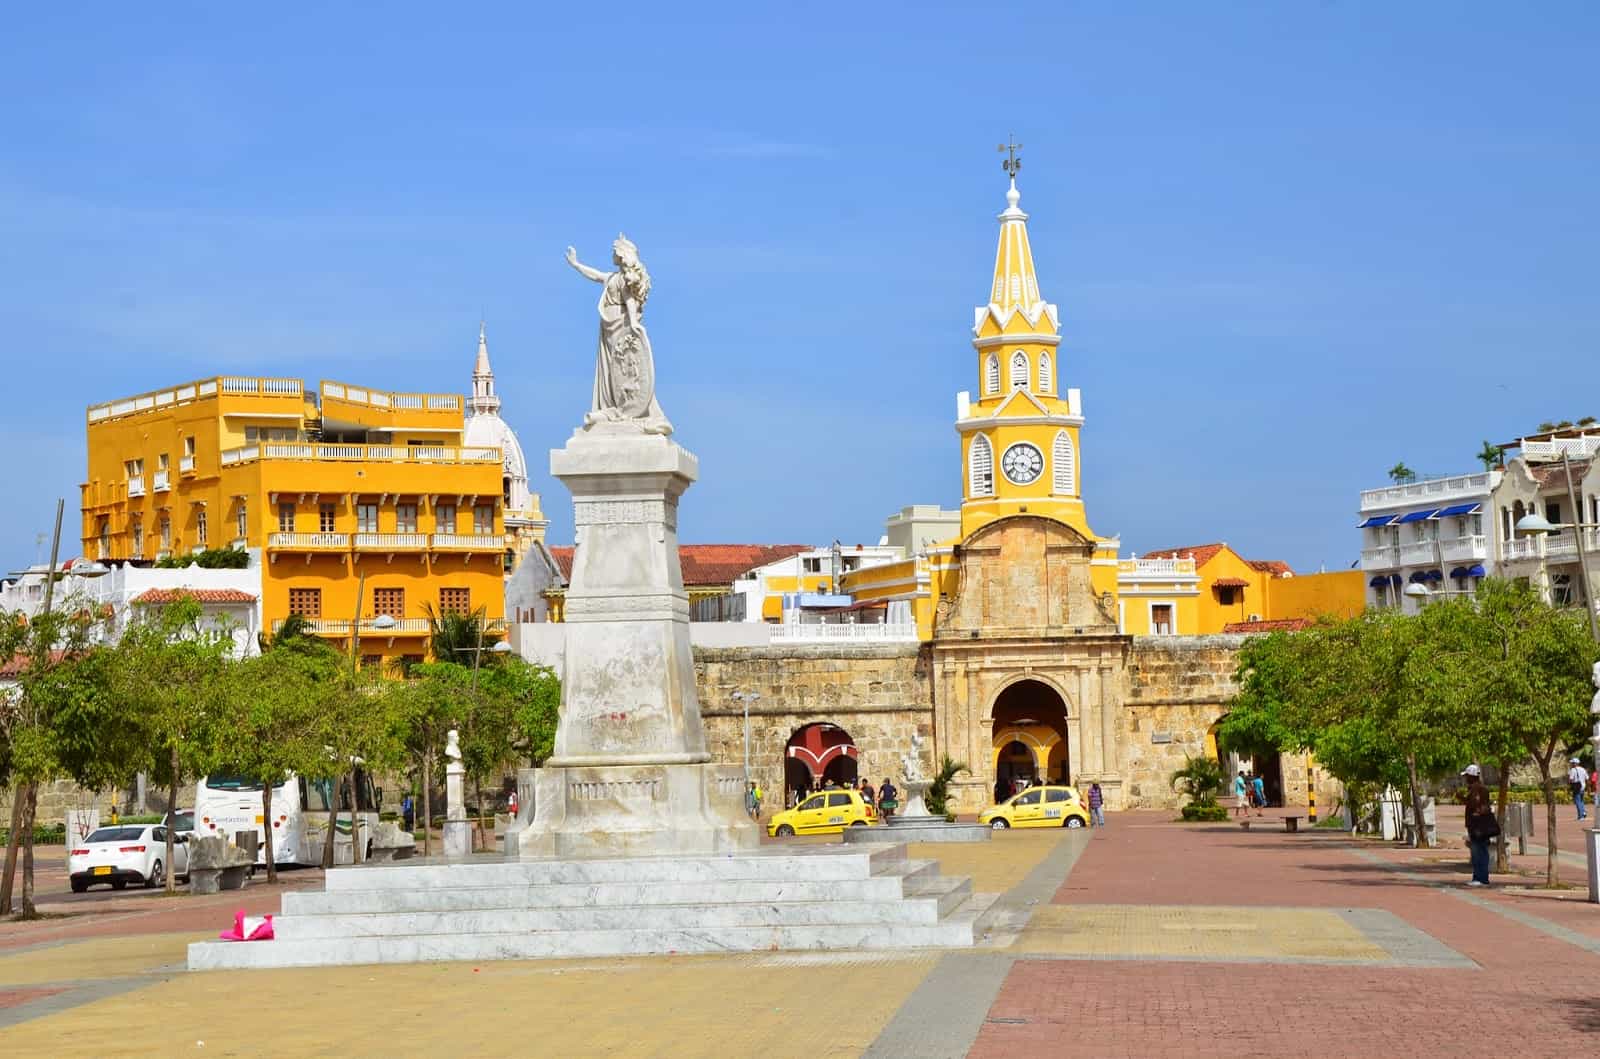 Plaza of the Martyrs in Cartagena, Colombia